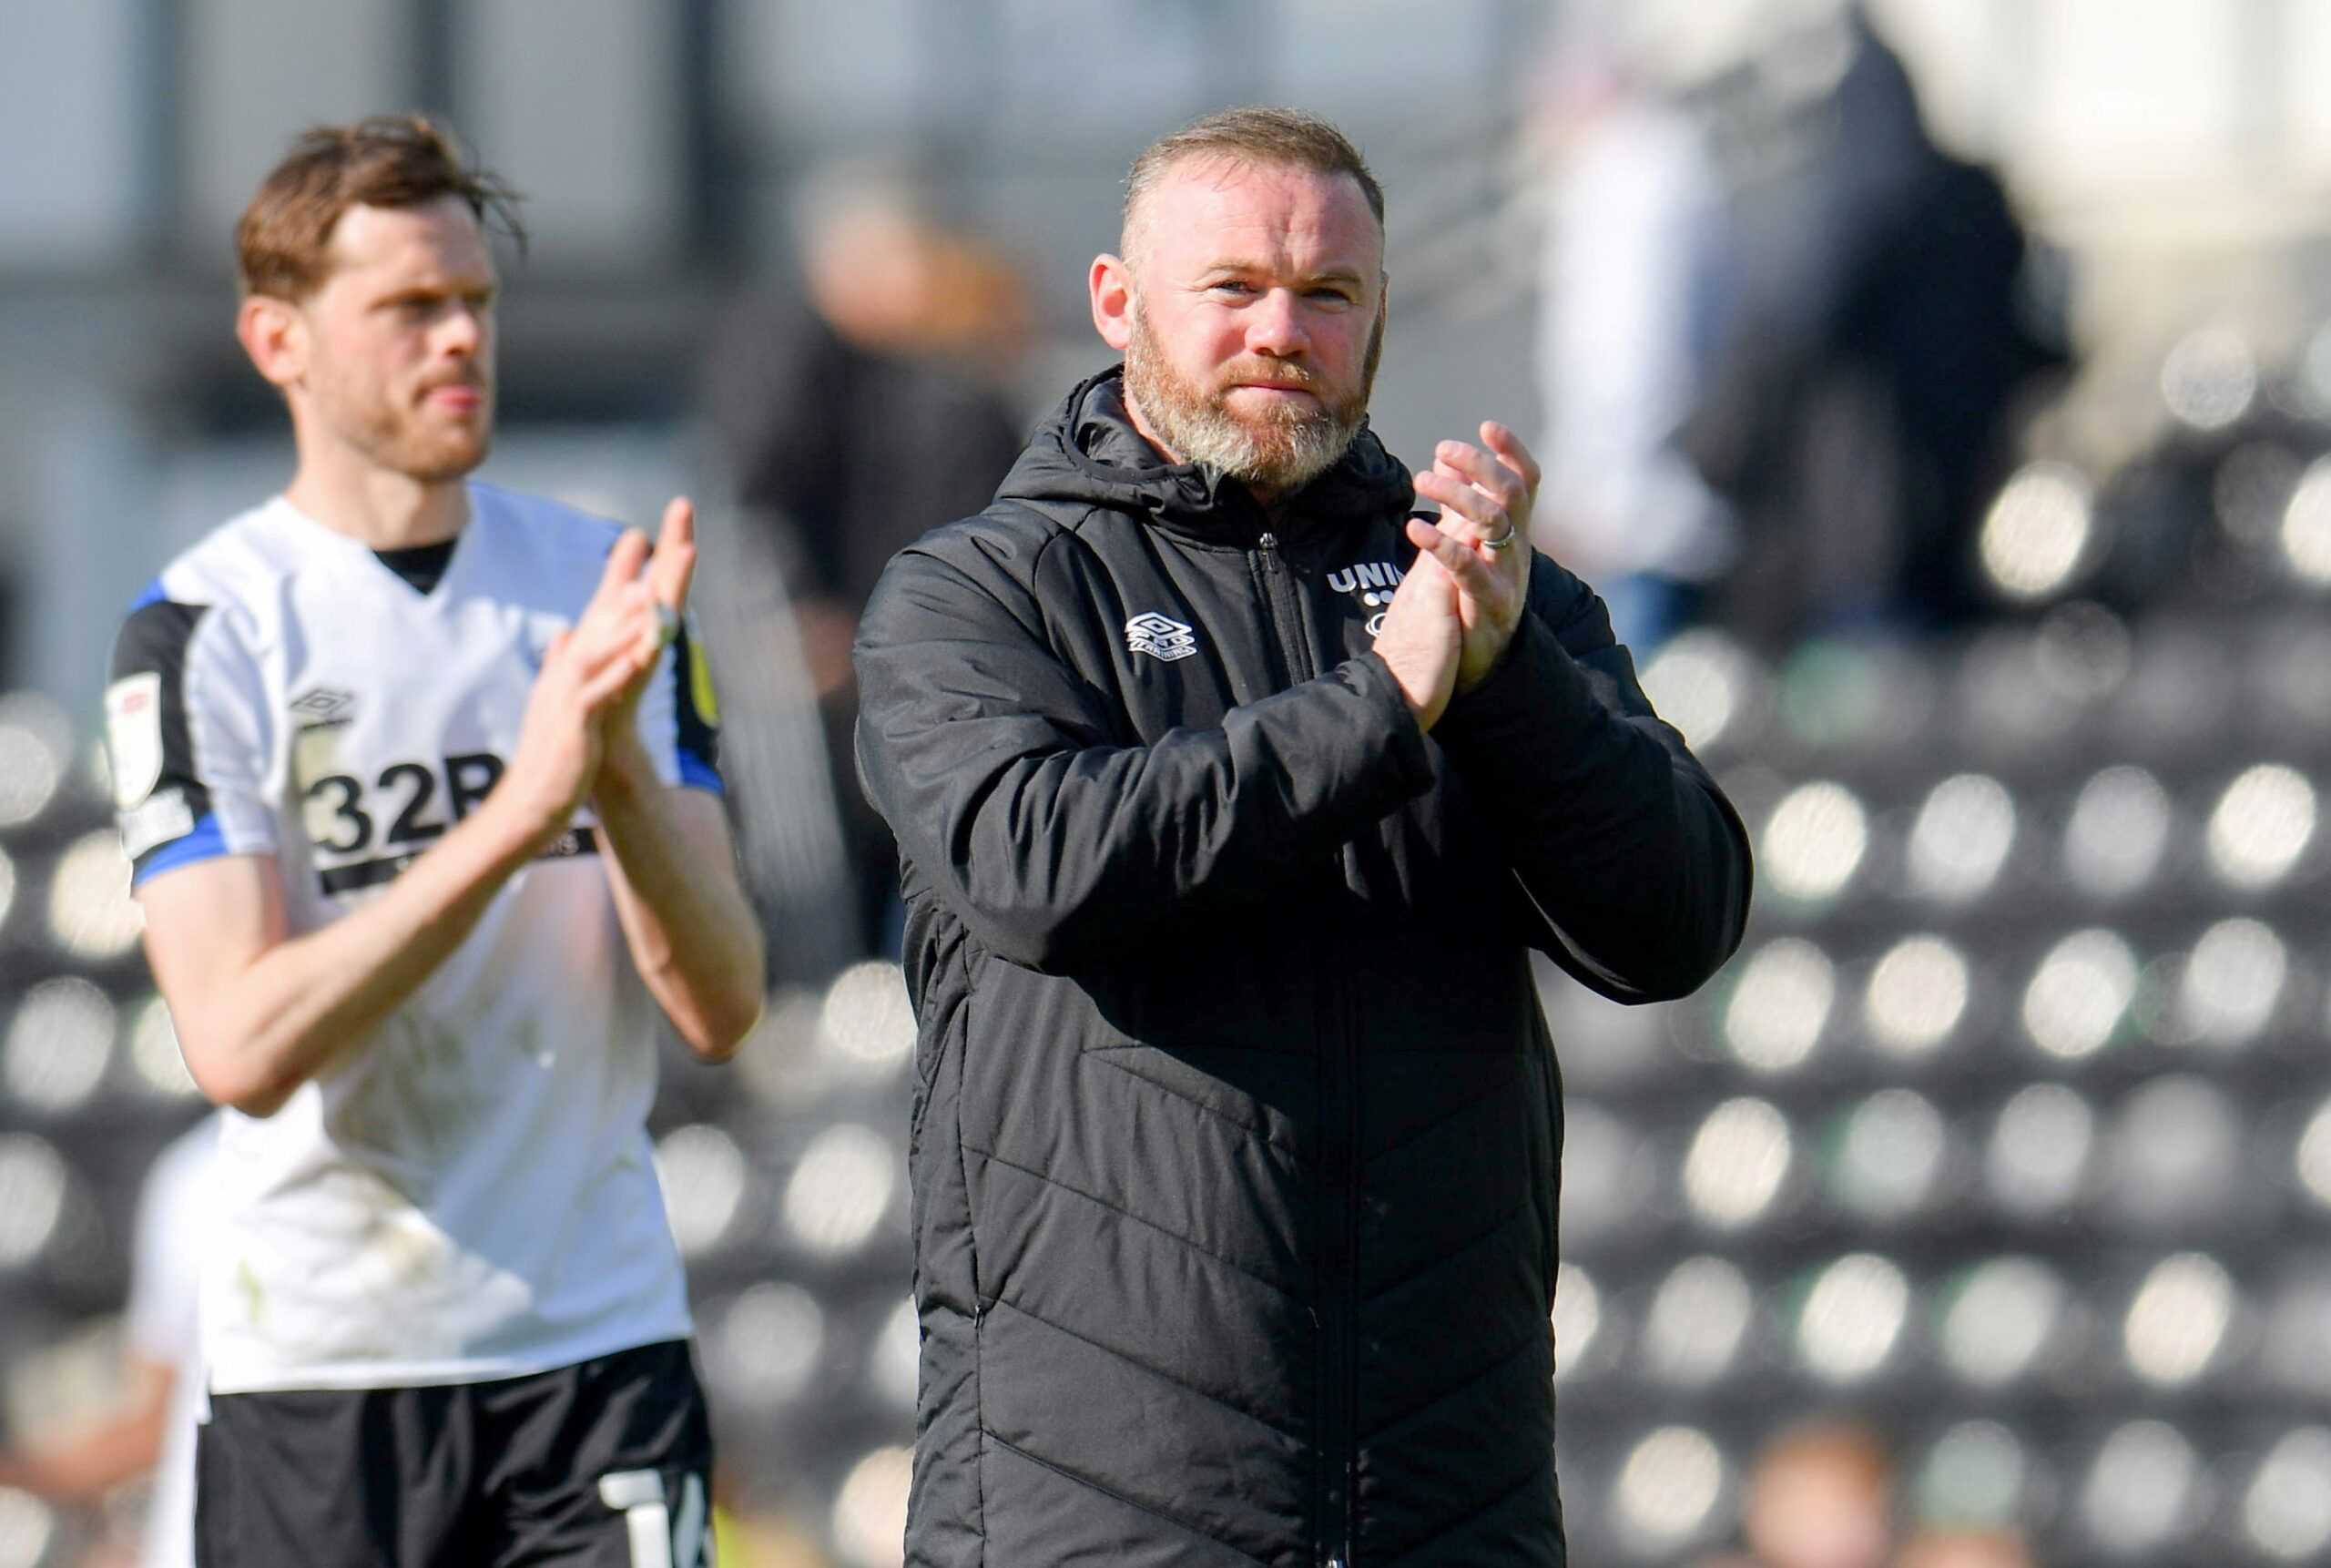 Soccer Football - Championship - Derby County v Bristol City - Pride Park, Derby, Britain - April 23, 2022 Derby County manager Wayne Rooney applauds fans after the match  Action Images/Paul Burrows  EDITORIAL USE ONLY. No use with unauthorized audio, video, data, fixture lists, club/league logos or 